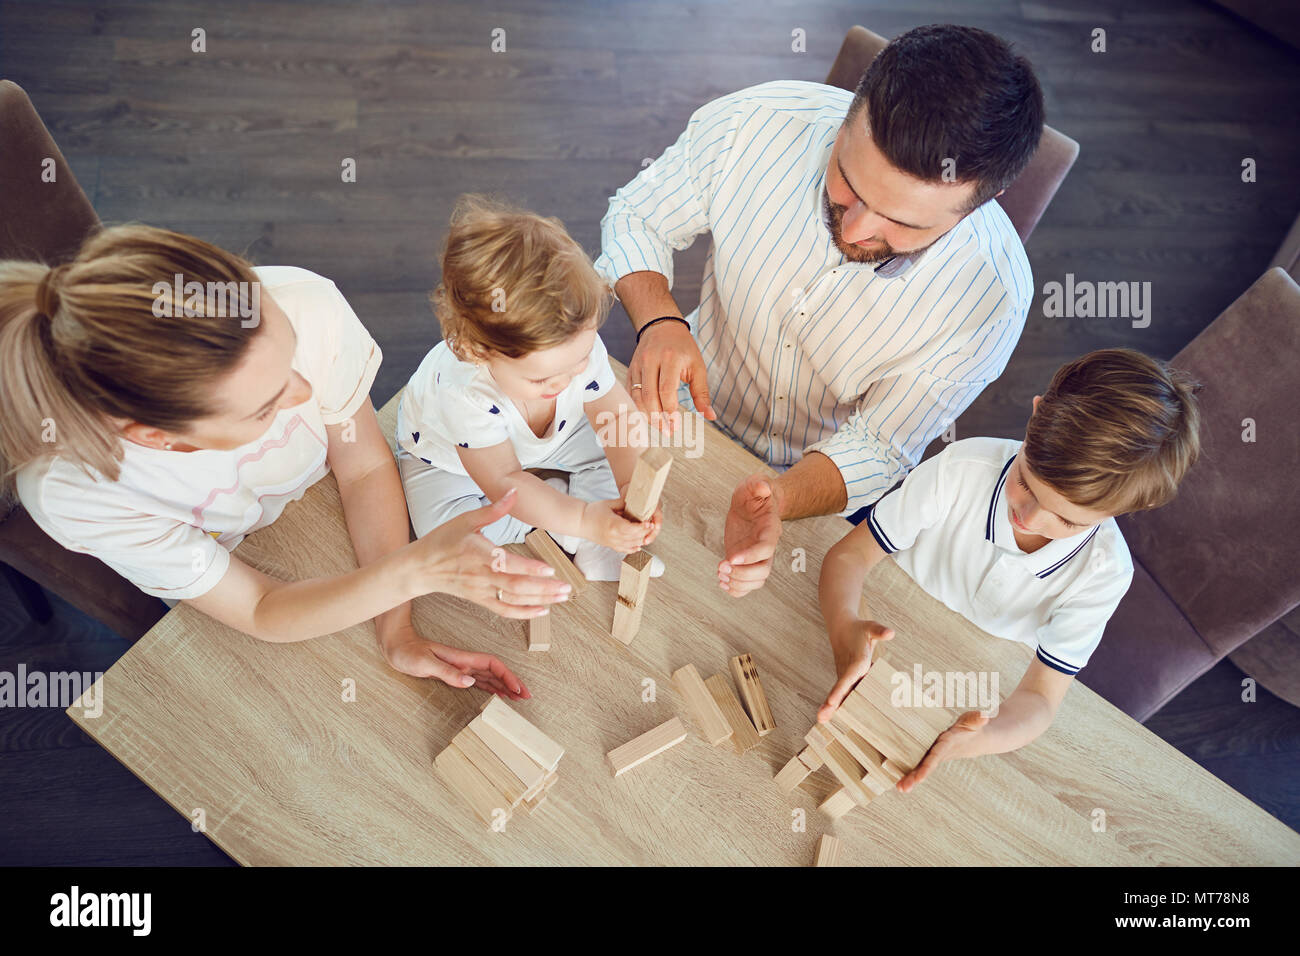 Top view of the family playing board games at a table. Stock Photo